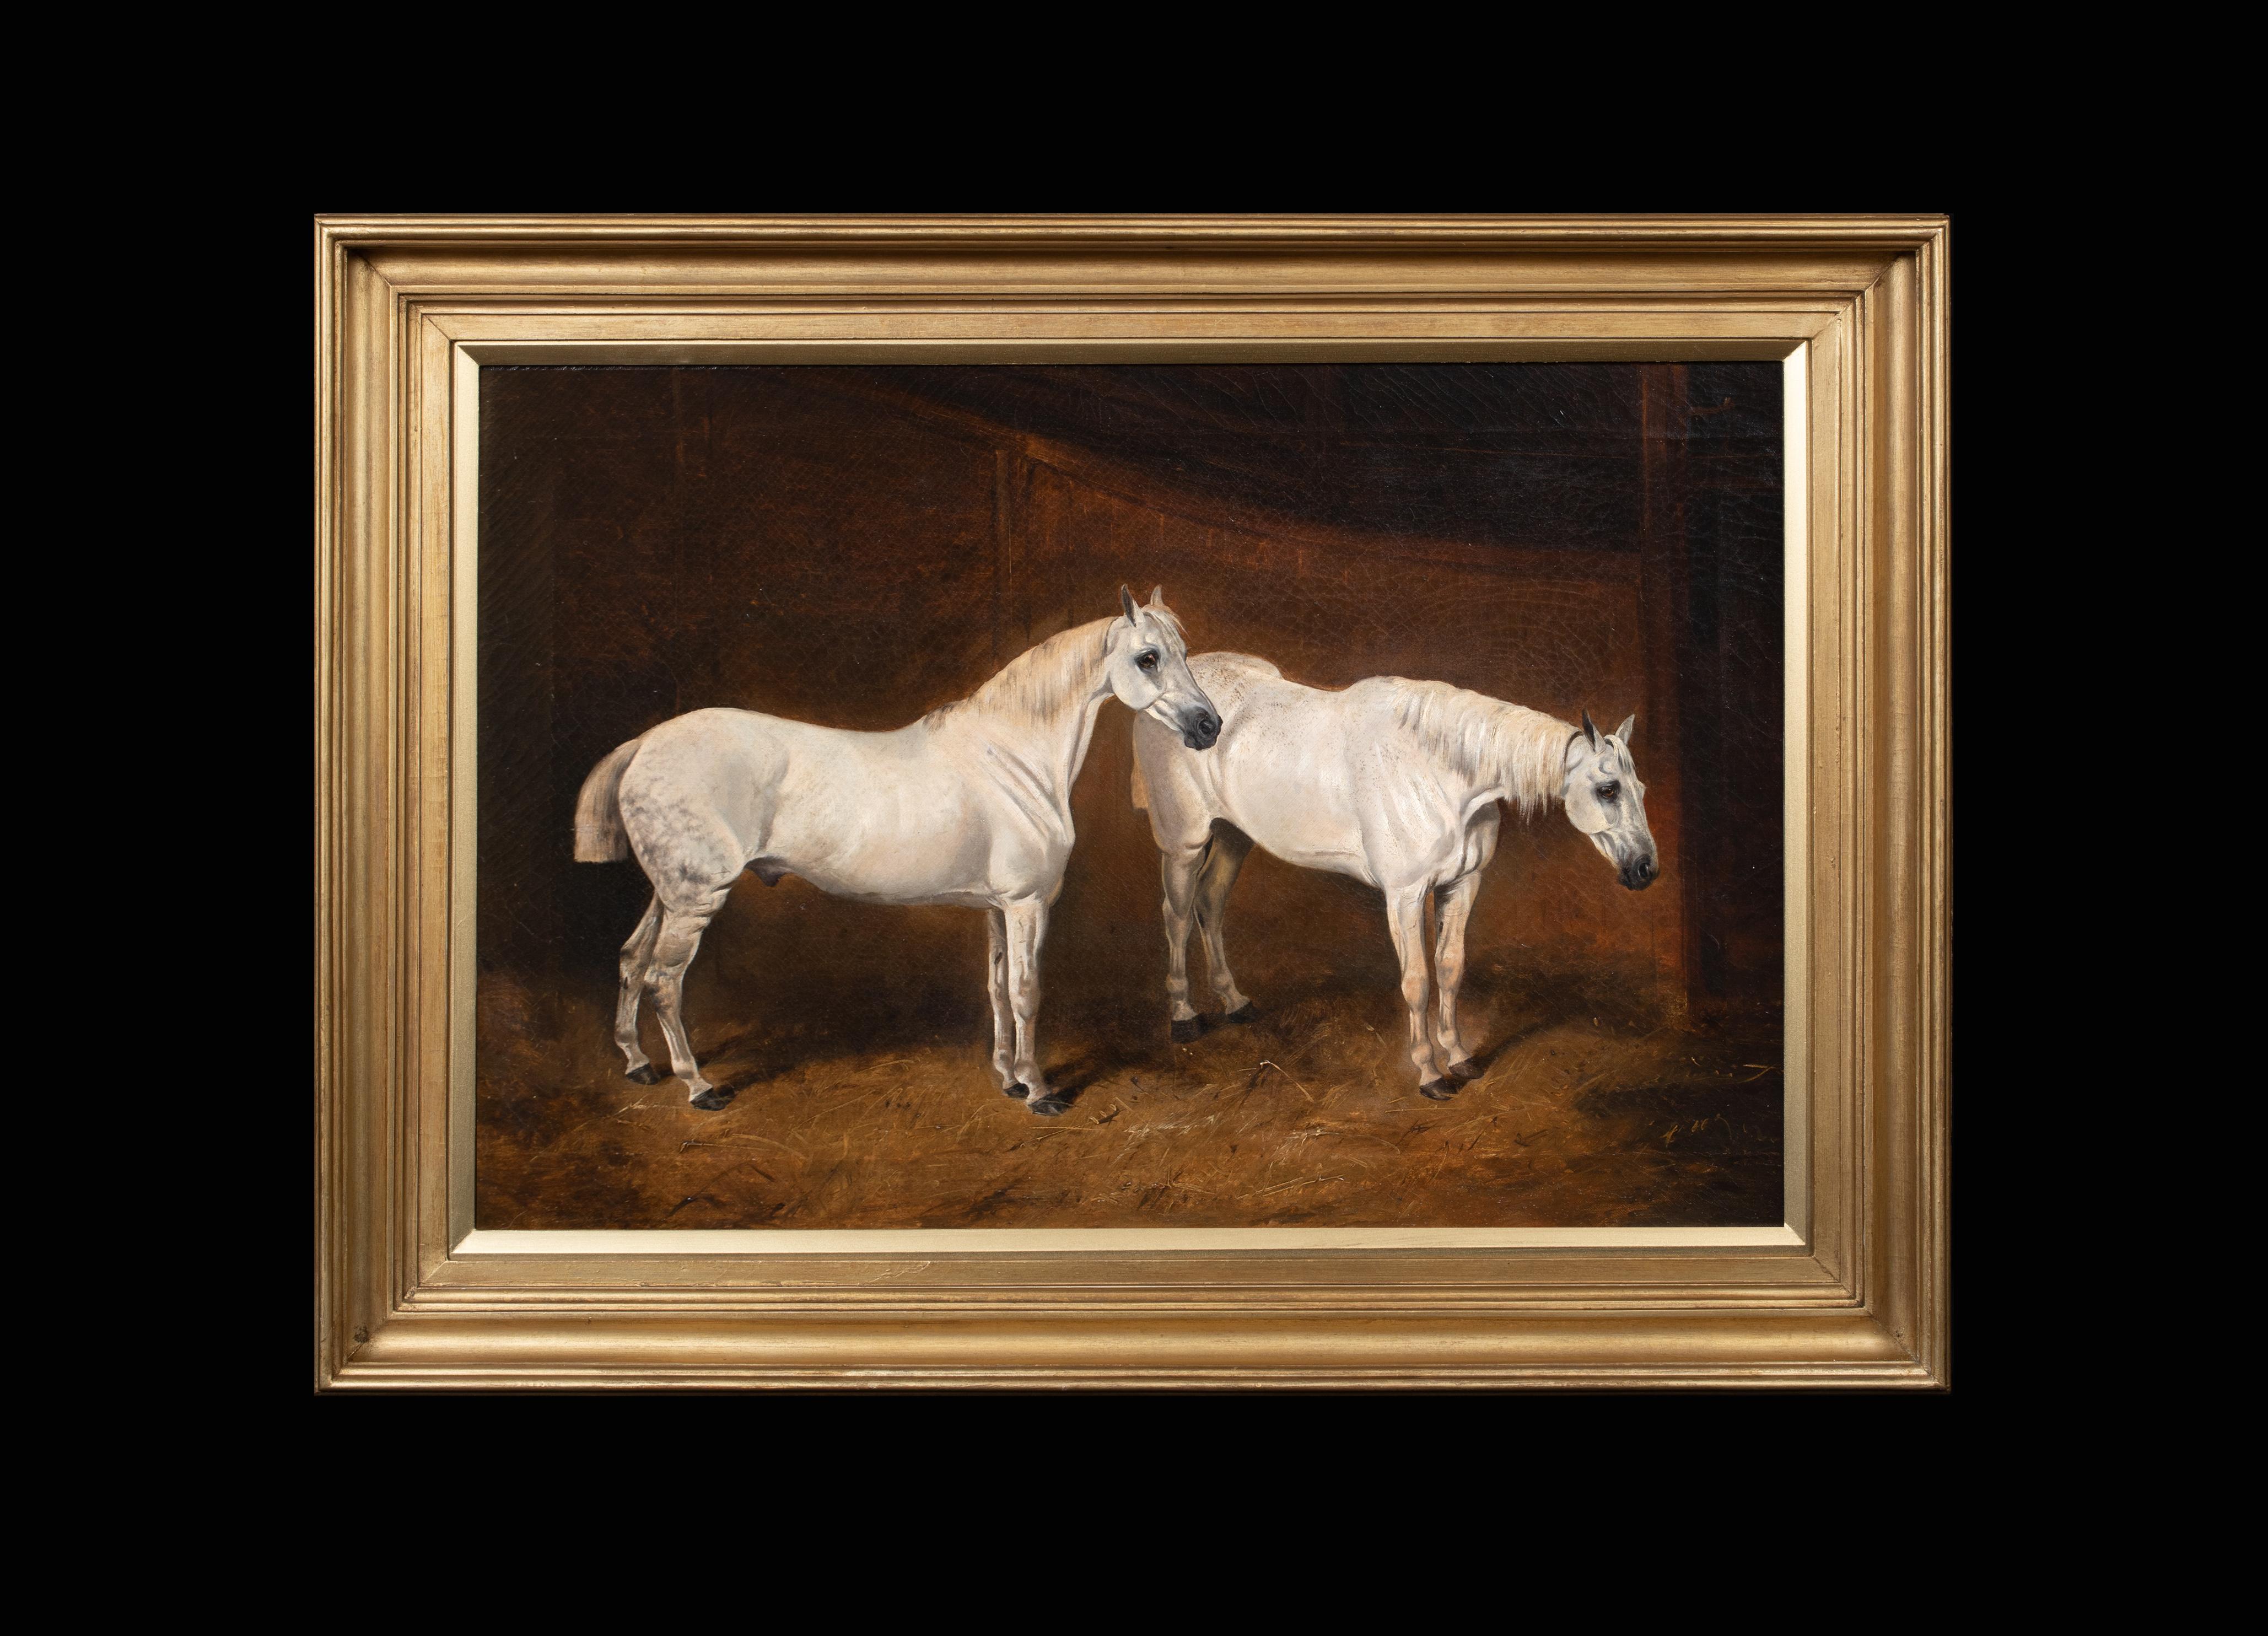 Two White Horses In A Stable, 19th Century - Painting by William Barraud